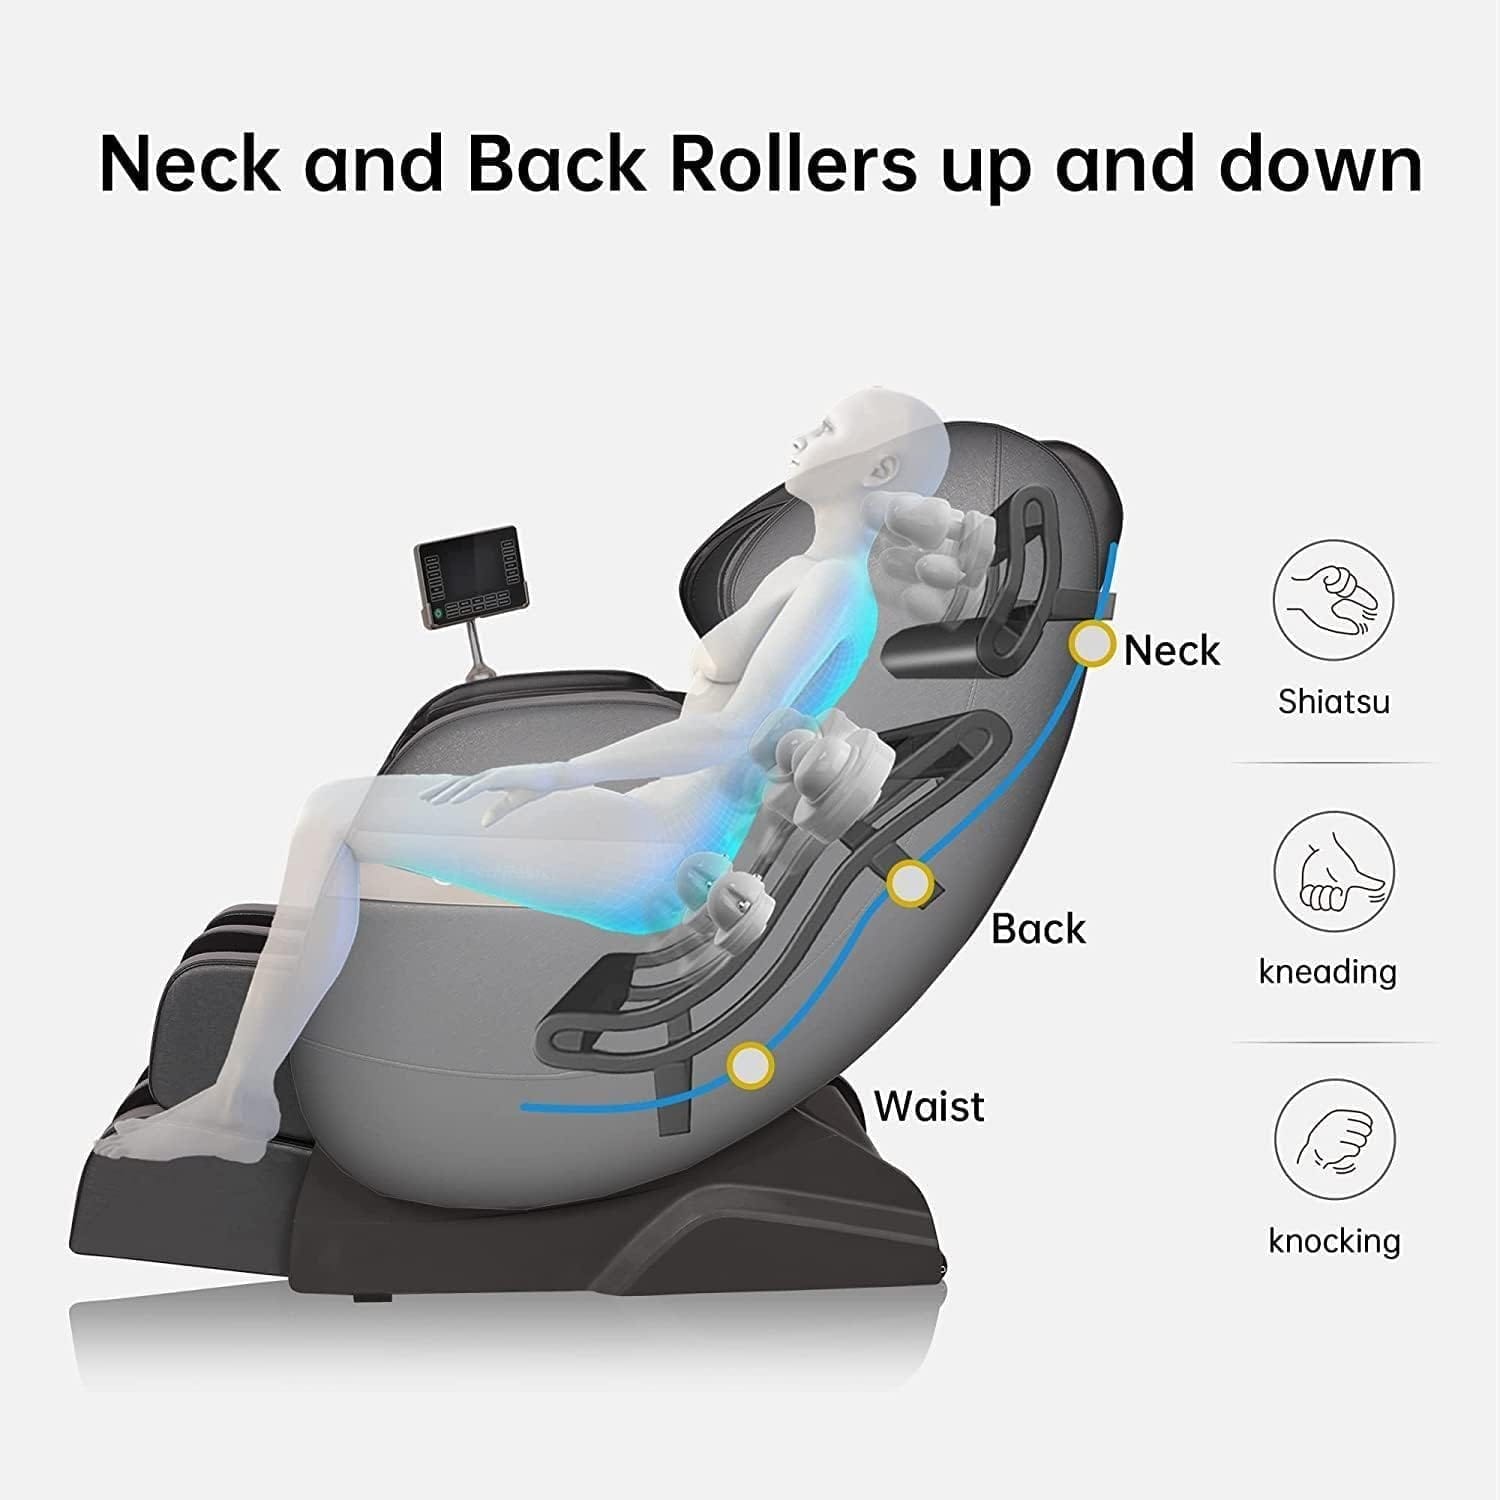 You are currently viewing Comparing 5 Top Massage Chairs: Real Relax, BILITOK, iRest, Bluetooth, and Nova